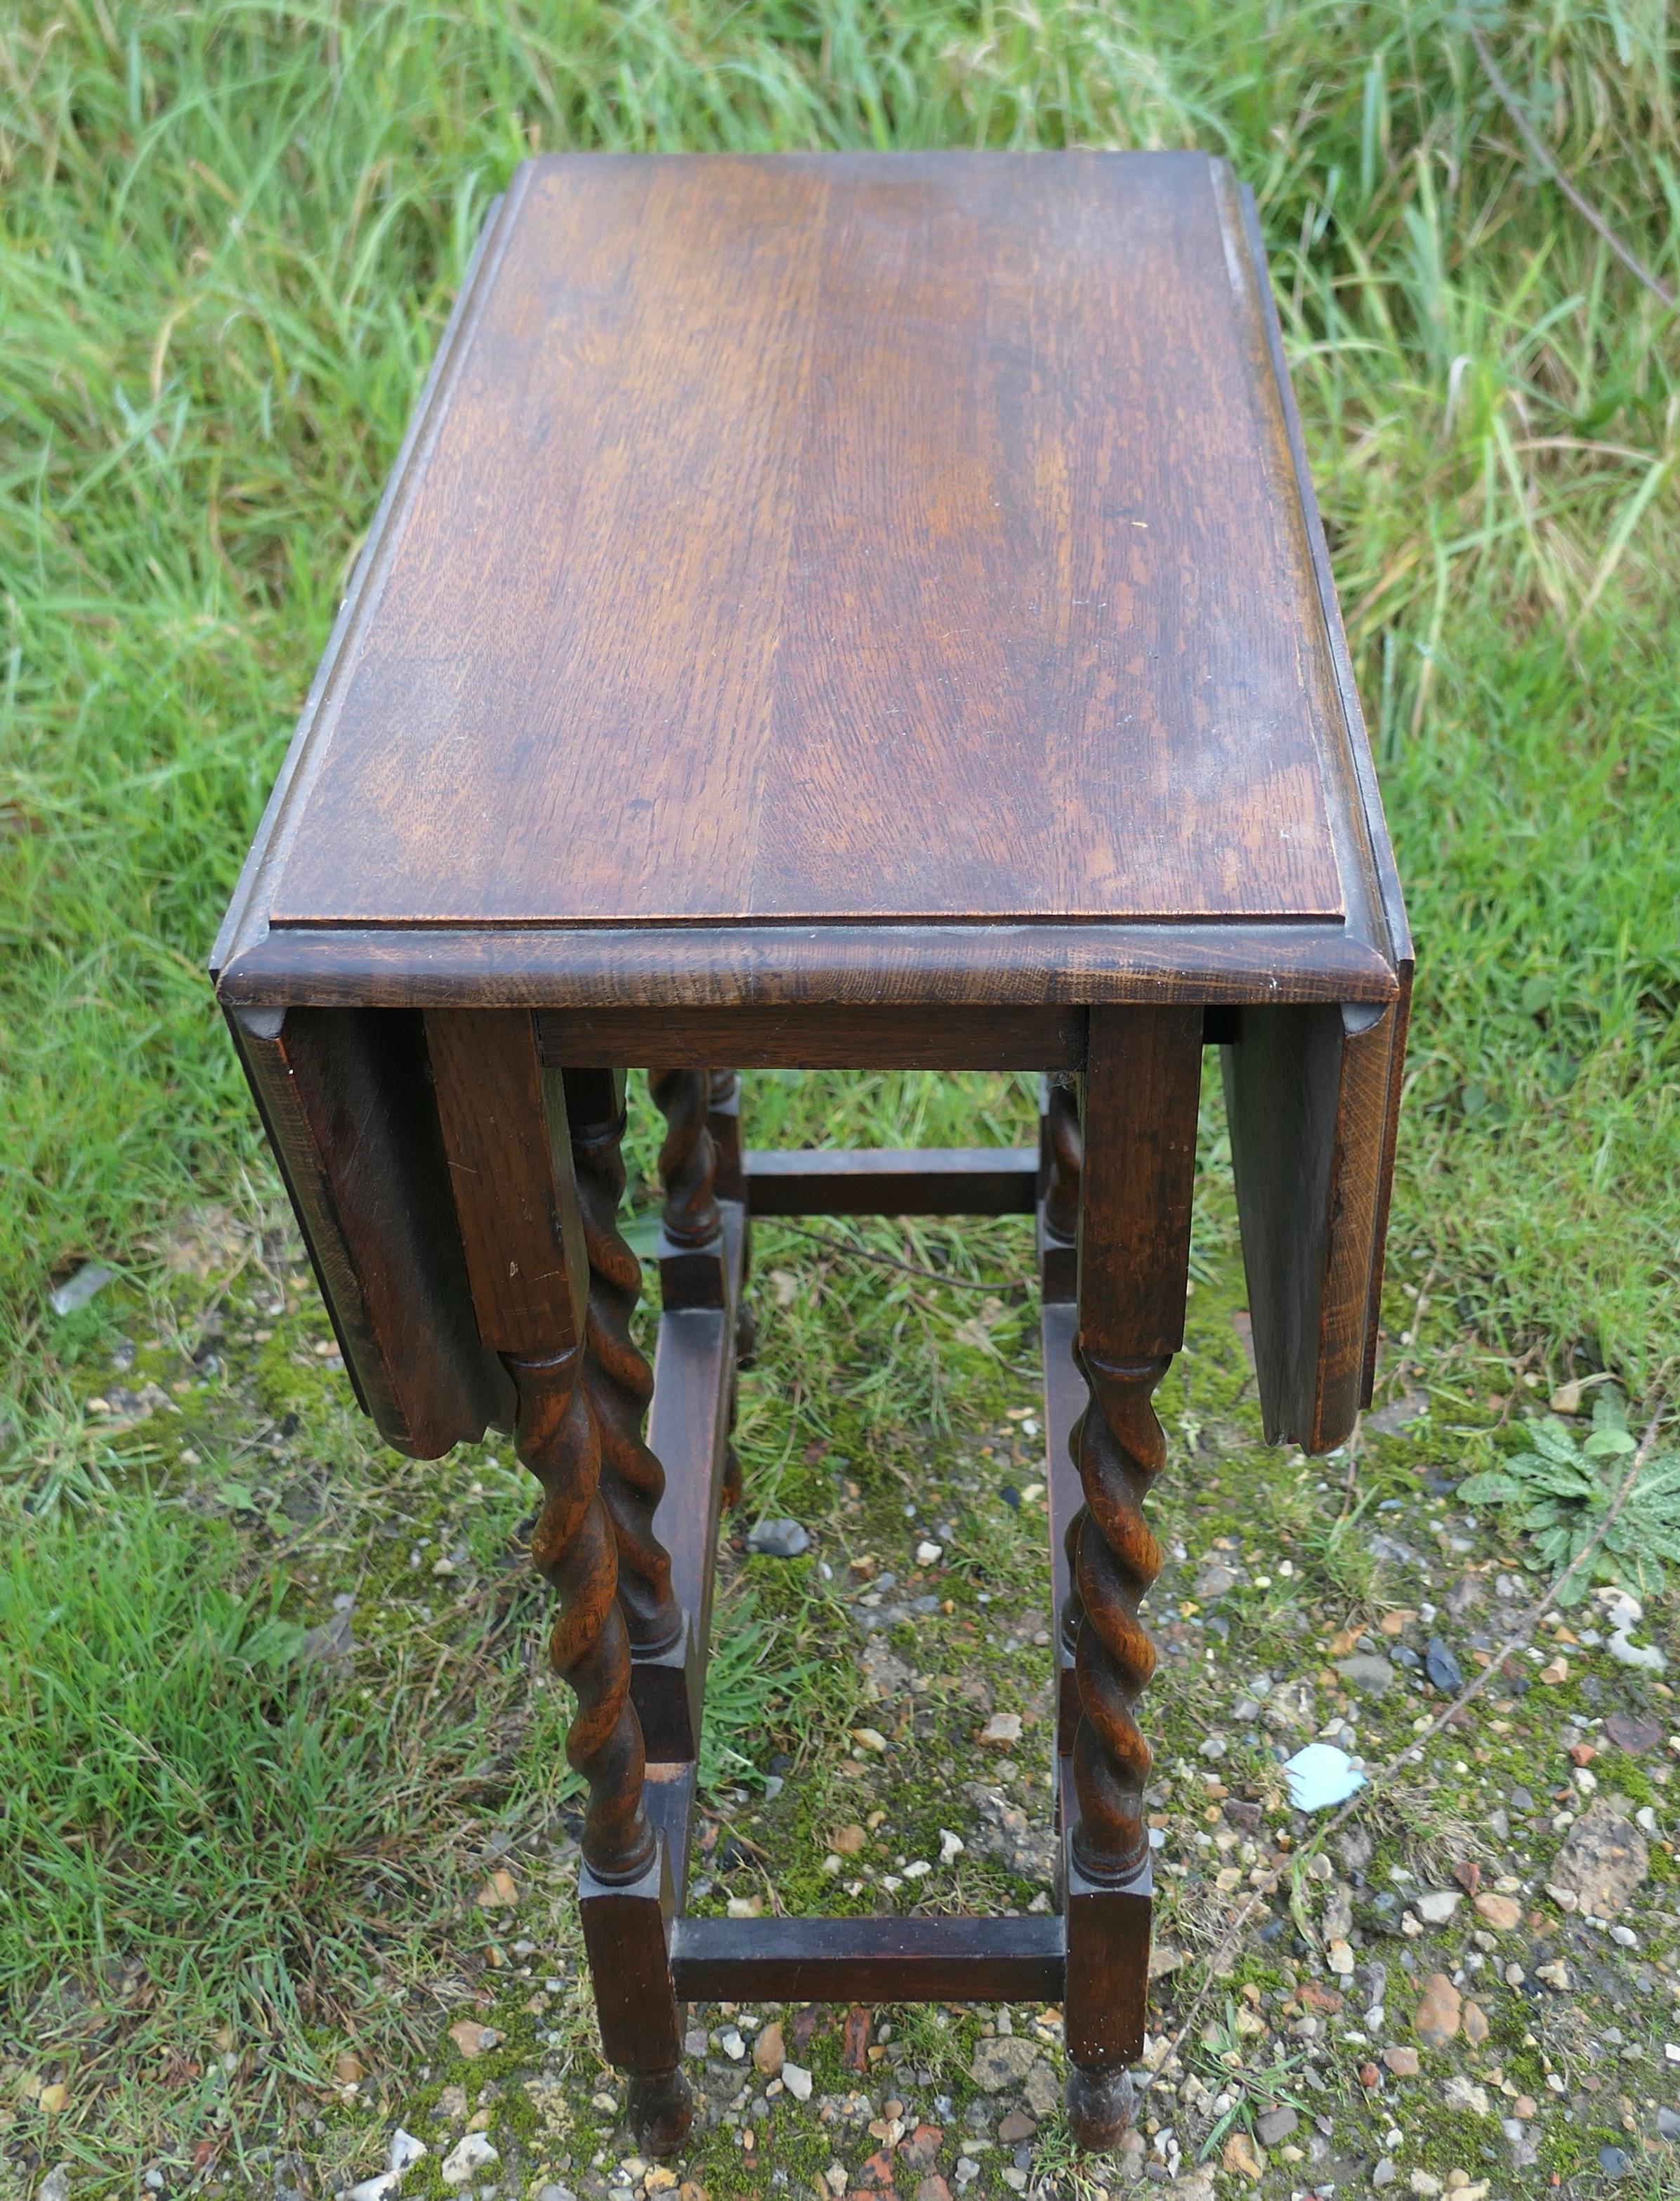 A Good Solid Oak Victorian Gate Leg Table


The table is made from solid Oak it has elegant crisply turned barley twist legs and Oak cross members. The table has a moulded edge and it has a handsome grain 
The table is very attractive, and in good